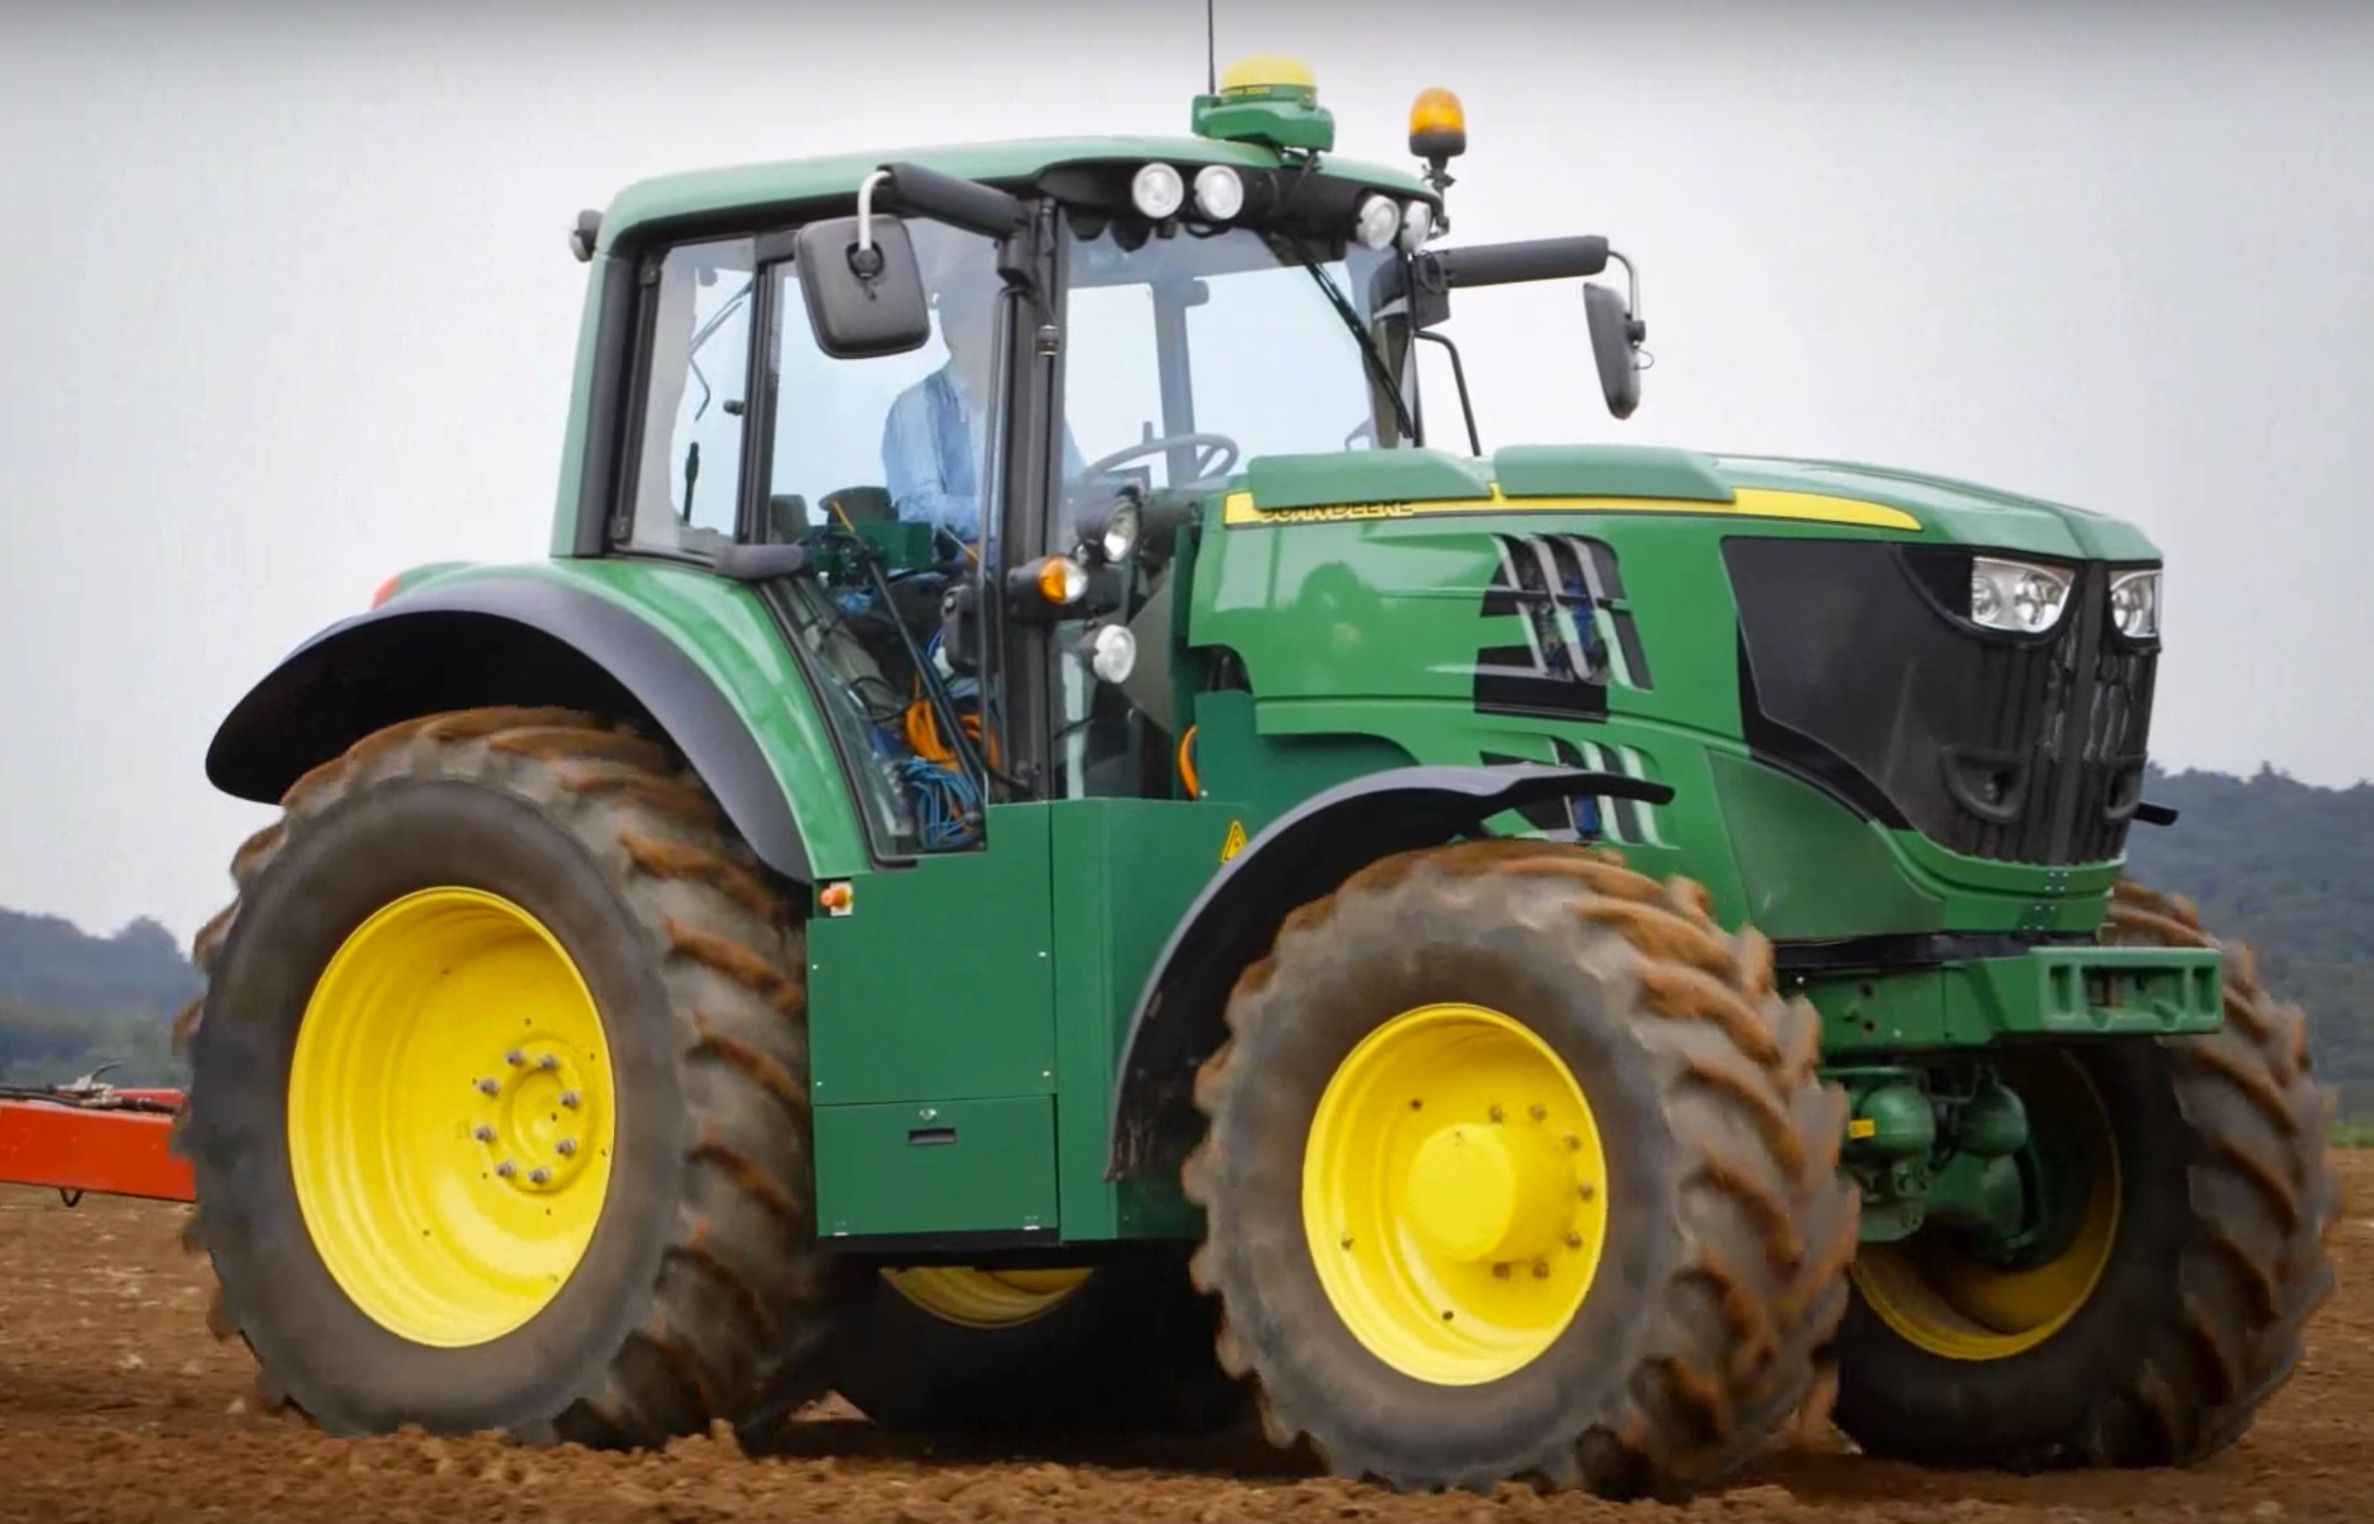 john deere just made its first fully electric tractor see it here image 1